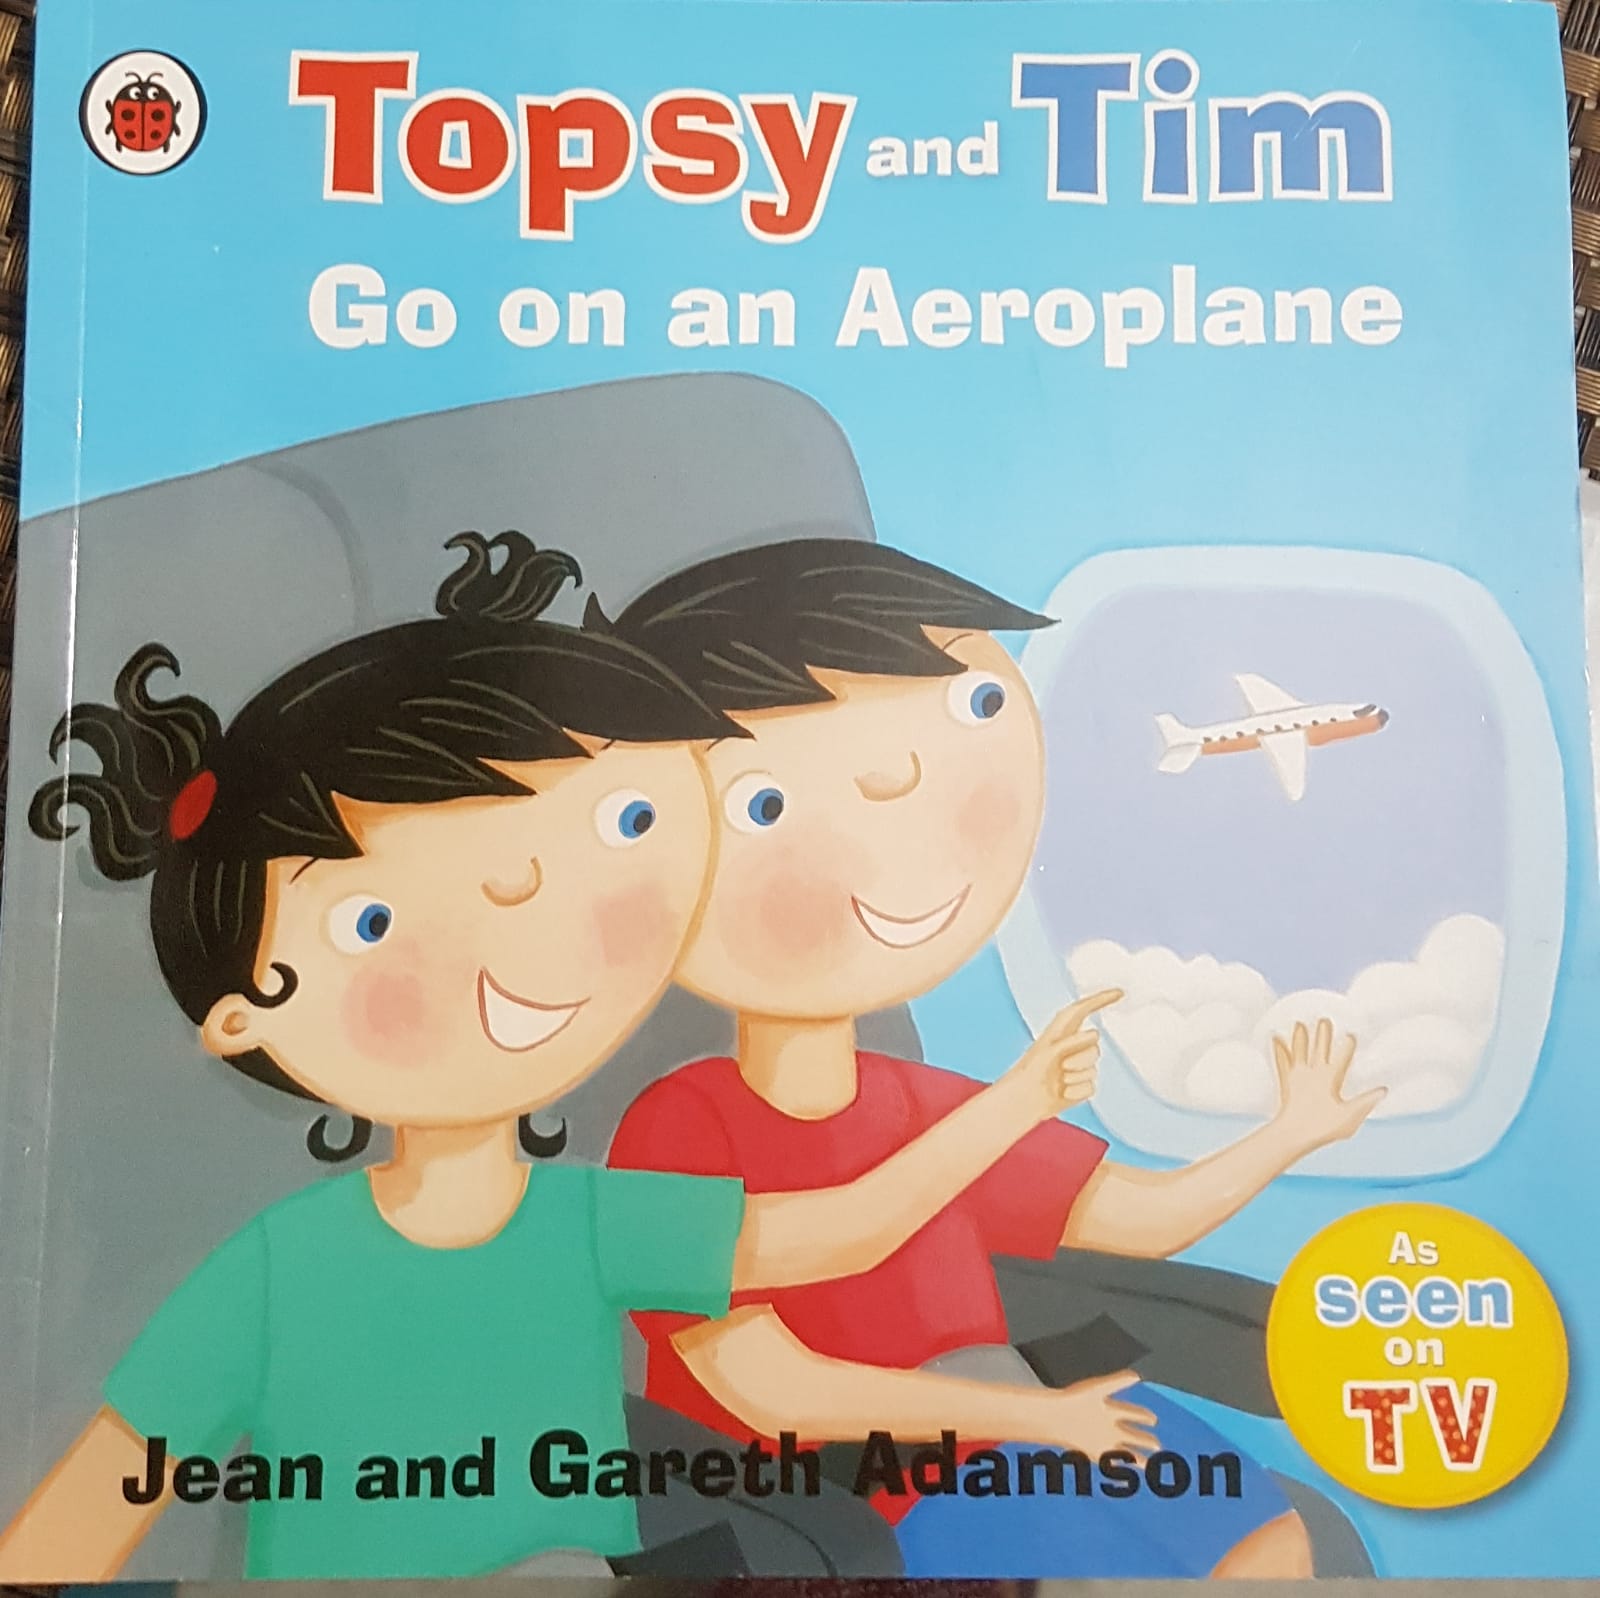 Flying For The First Time? Some Books To Get Your Bub Excited!